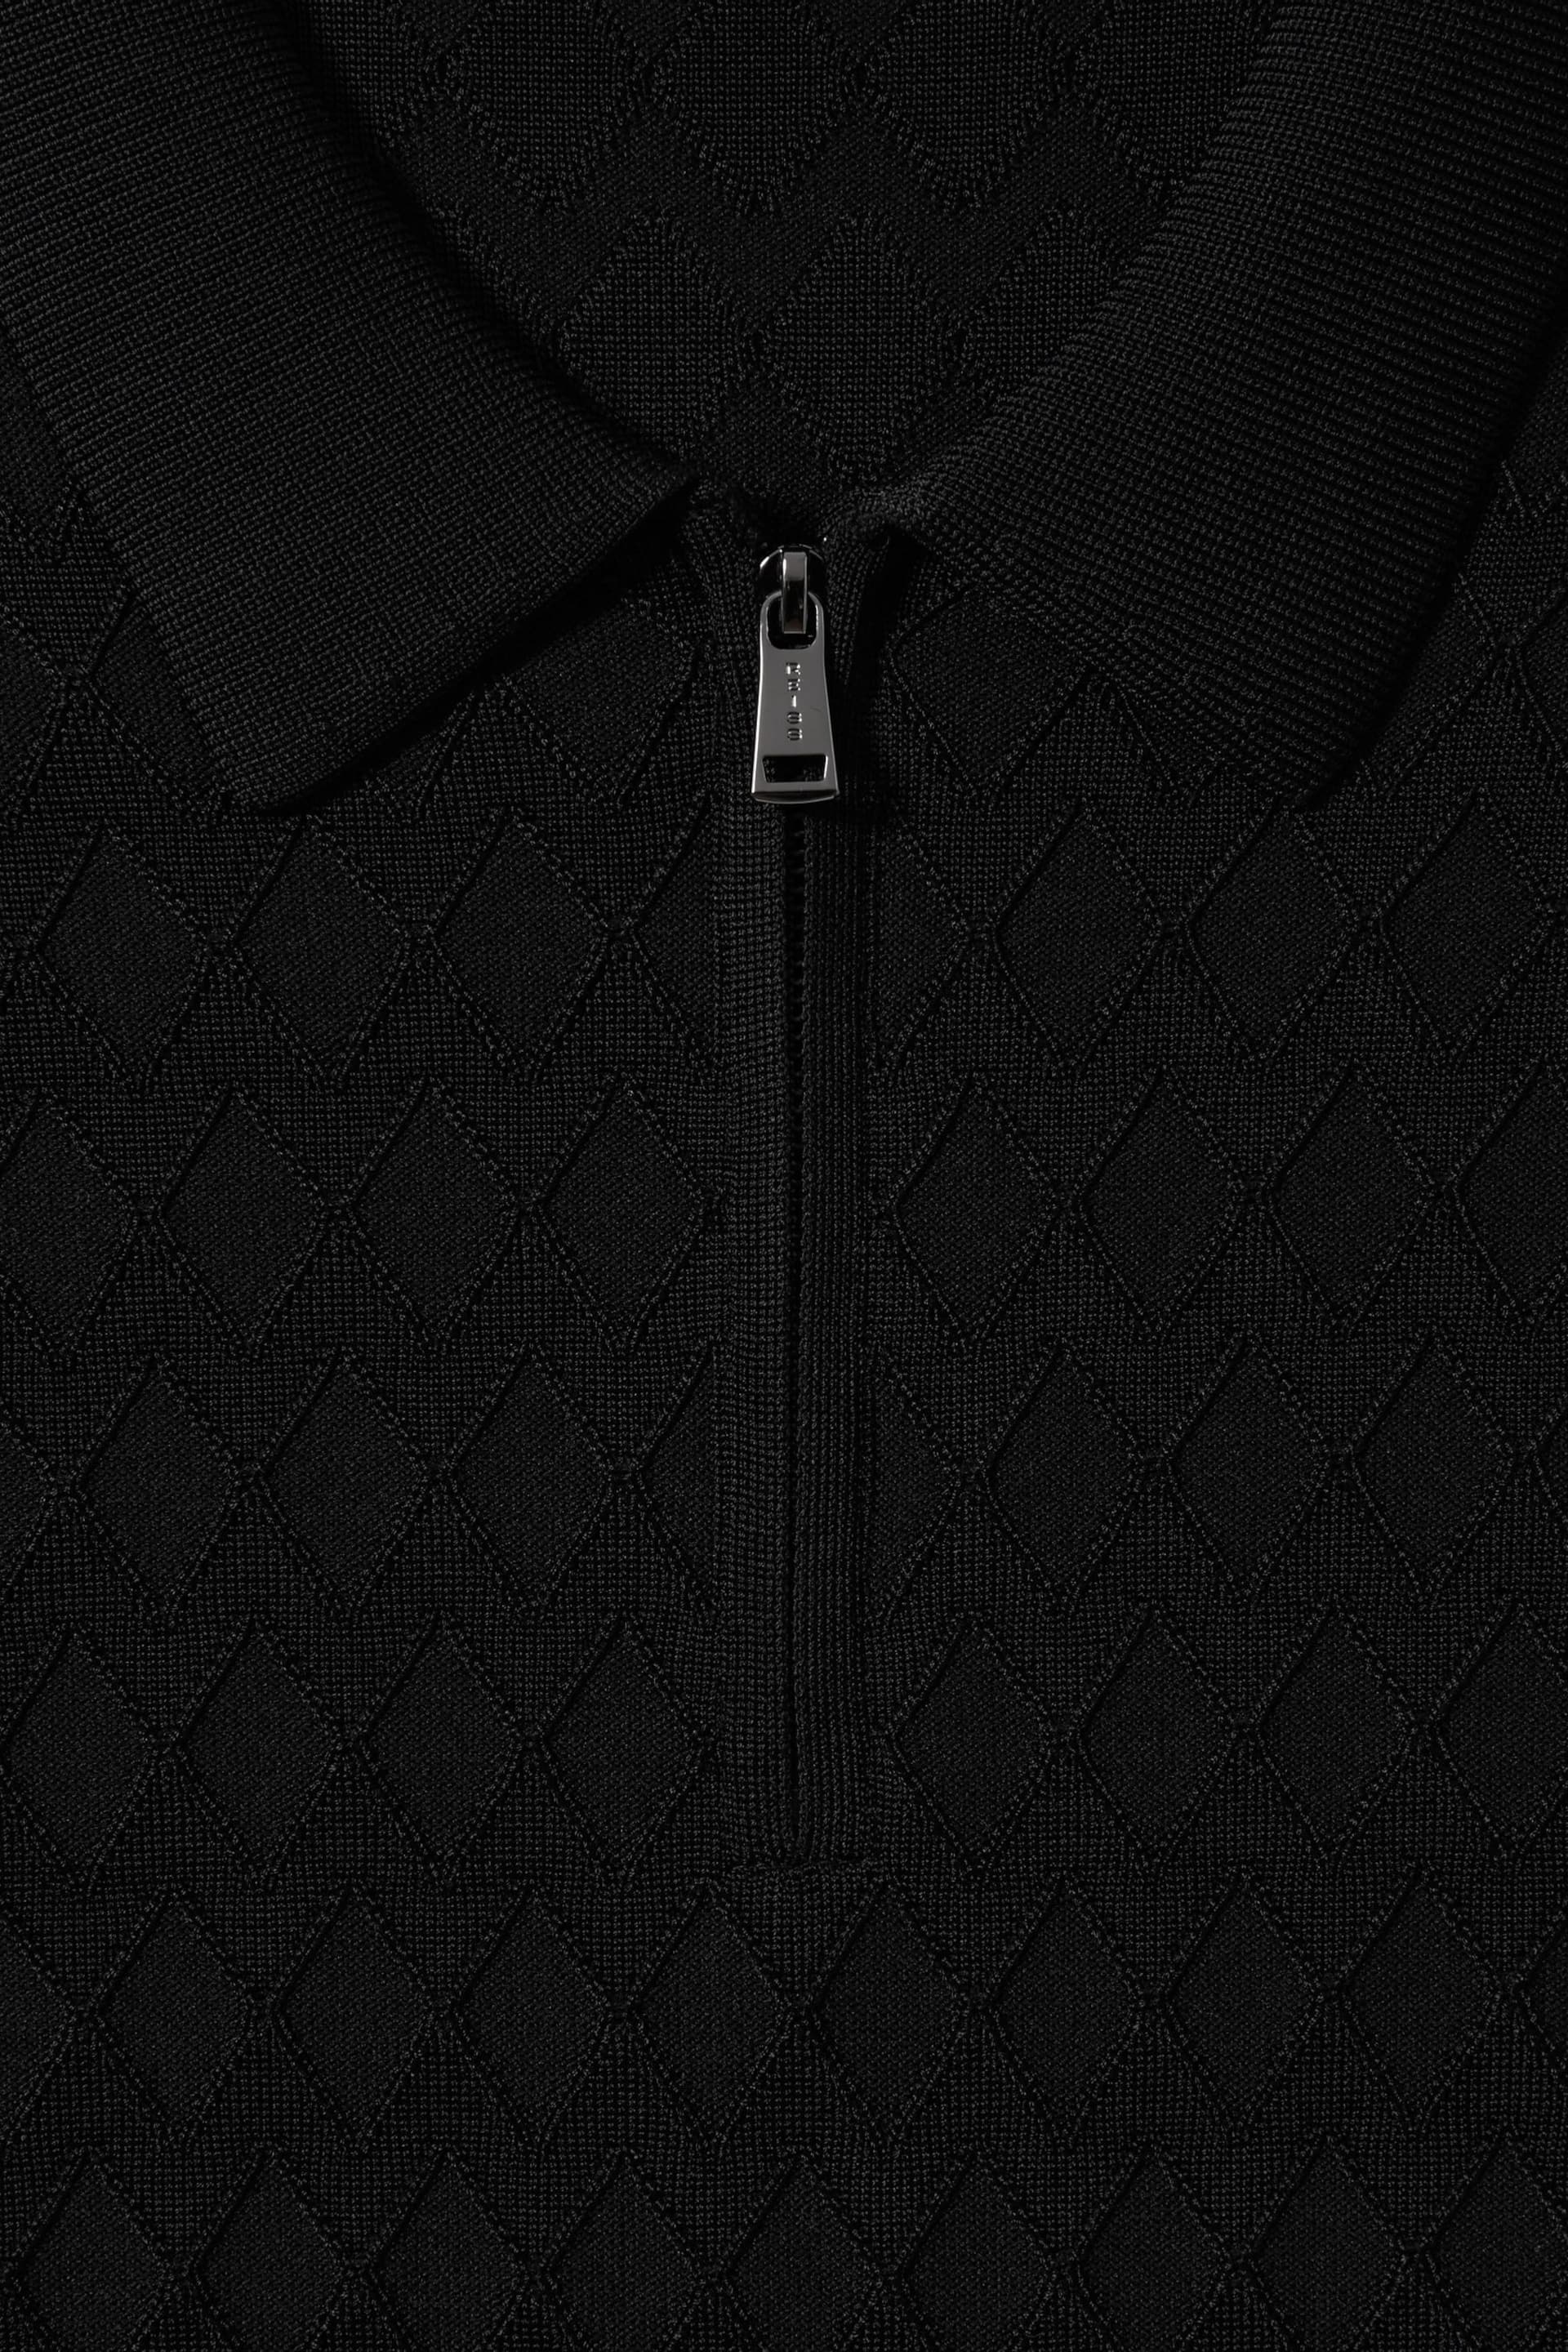 Reiss Black Rizzo Half-Zip Knitted Polo Shirt - Image 5 of 5